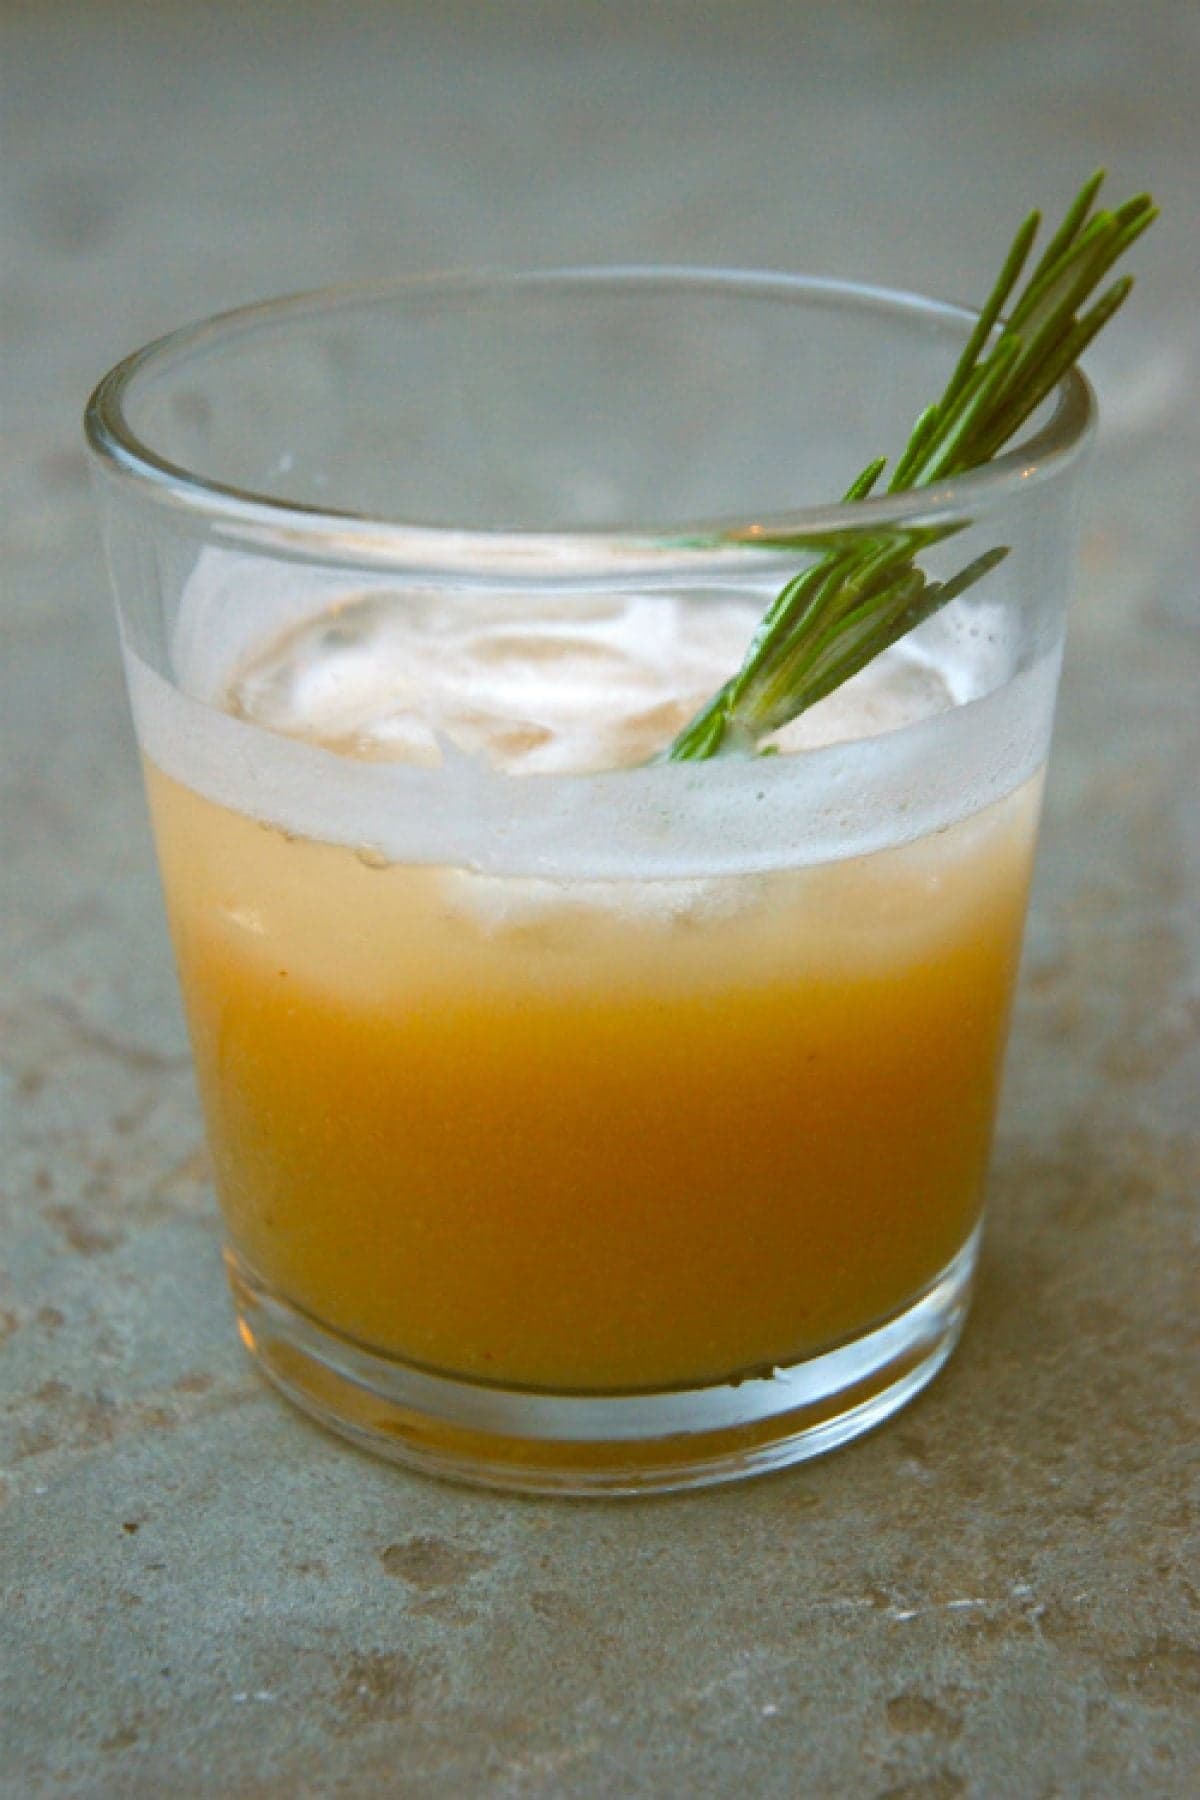 Rosemary–Clove Simple Syrup